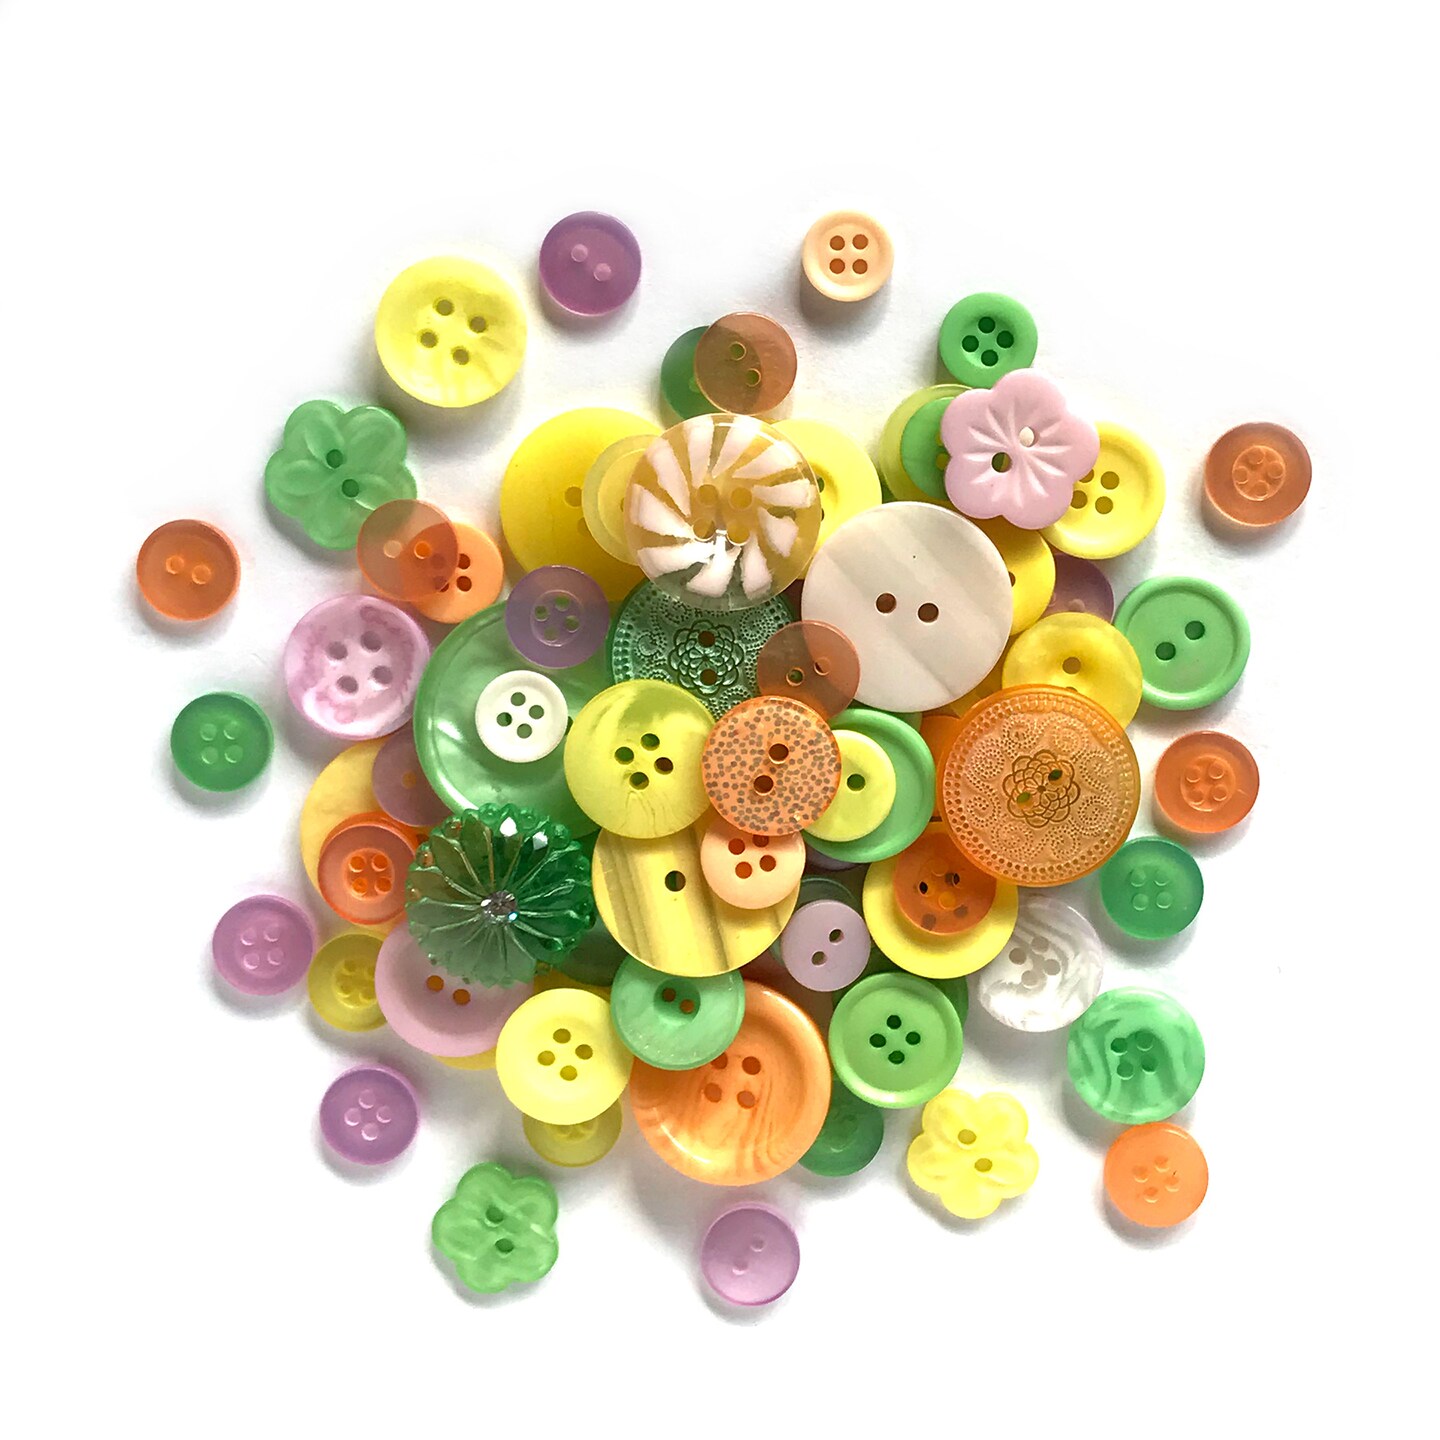 BROWN MIXED BUTTONS / PLASTIC BUTTONS / ASSORTED BUTTON